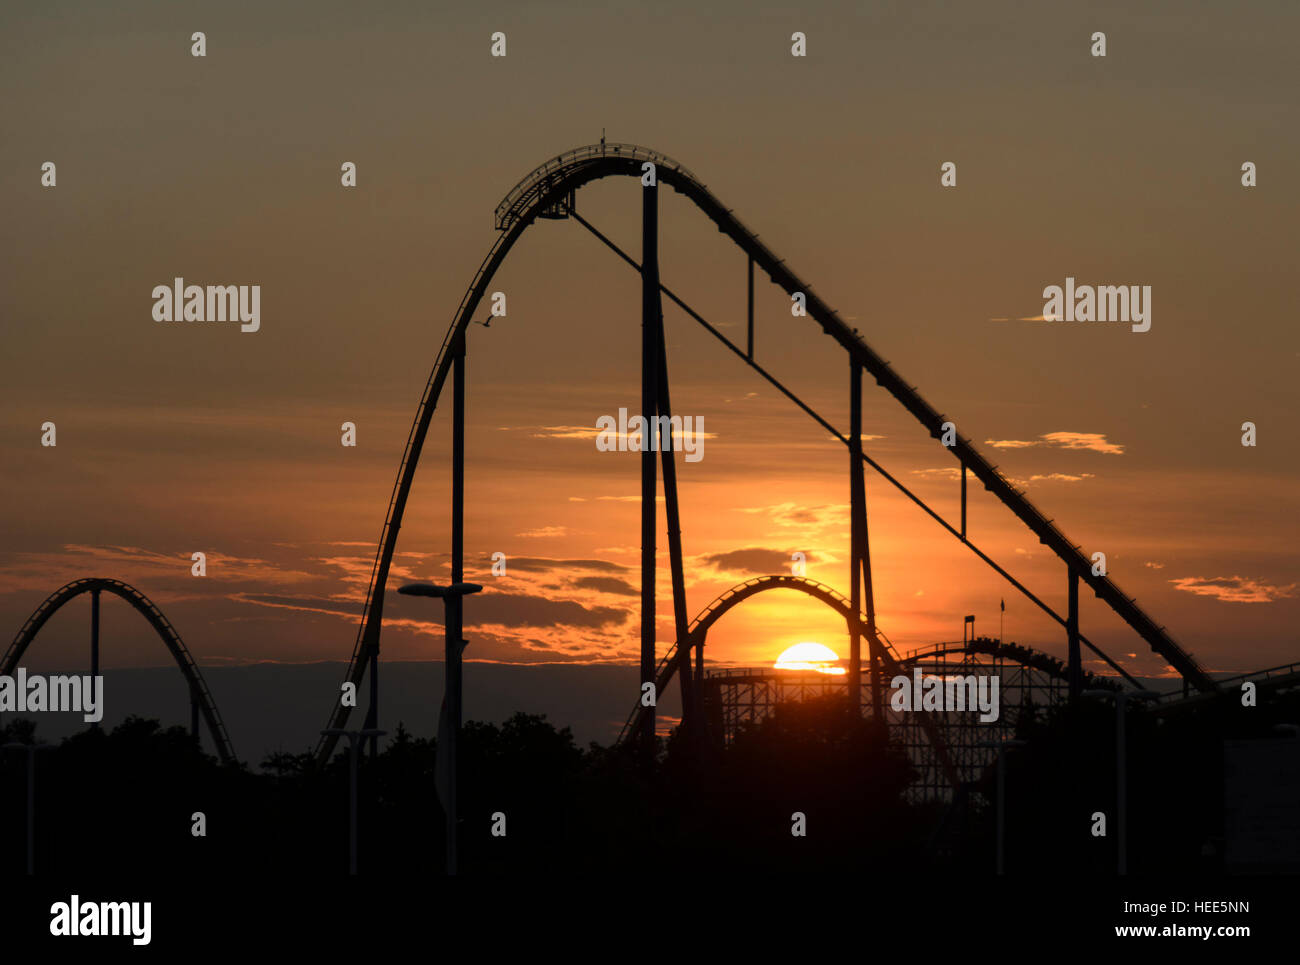 Silhouette of roller coaster at sunset Stock Photo